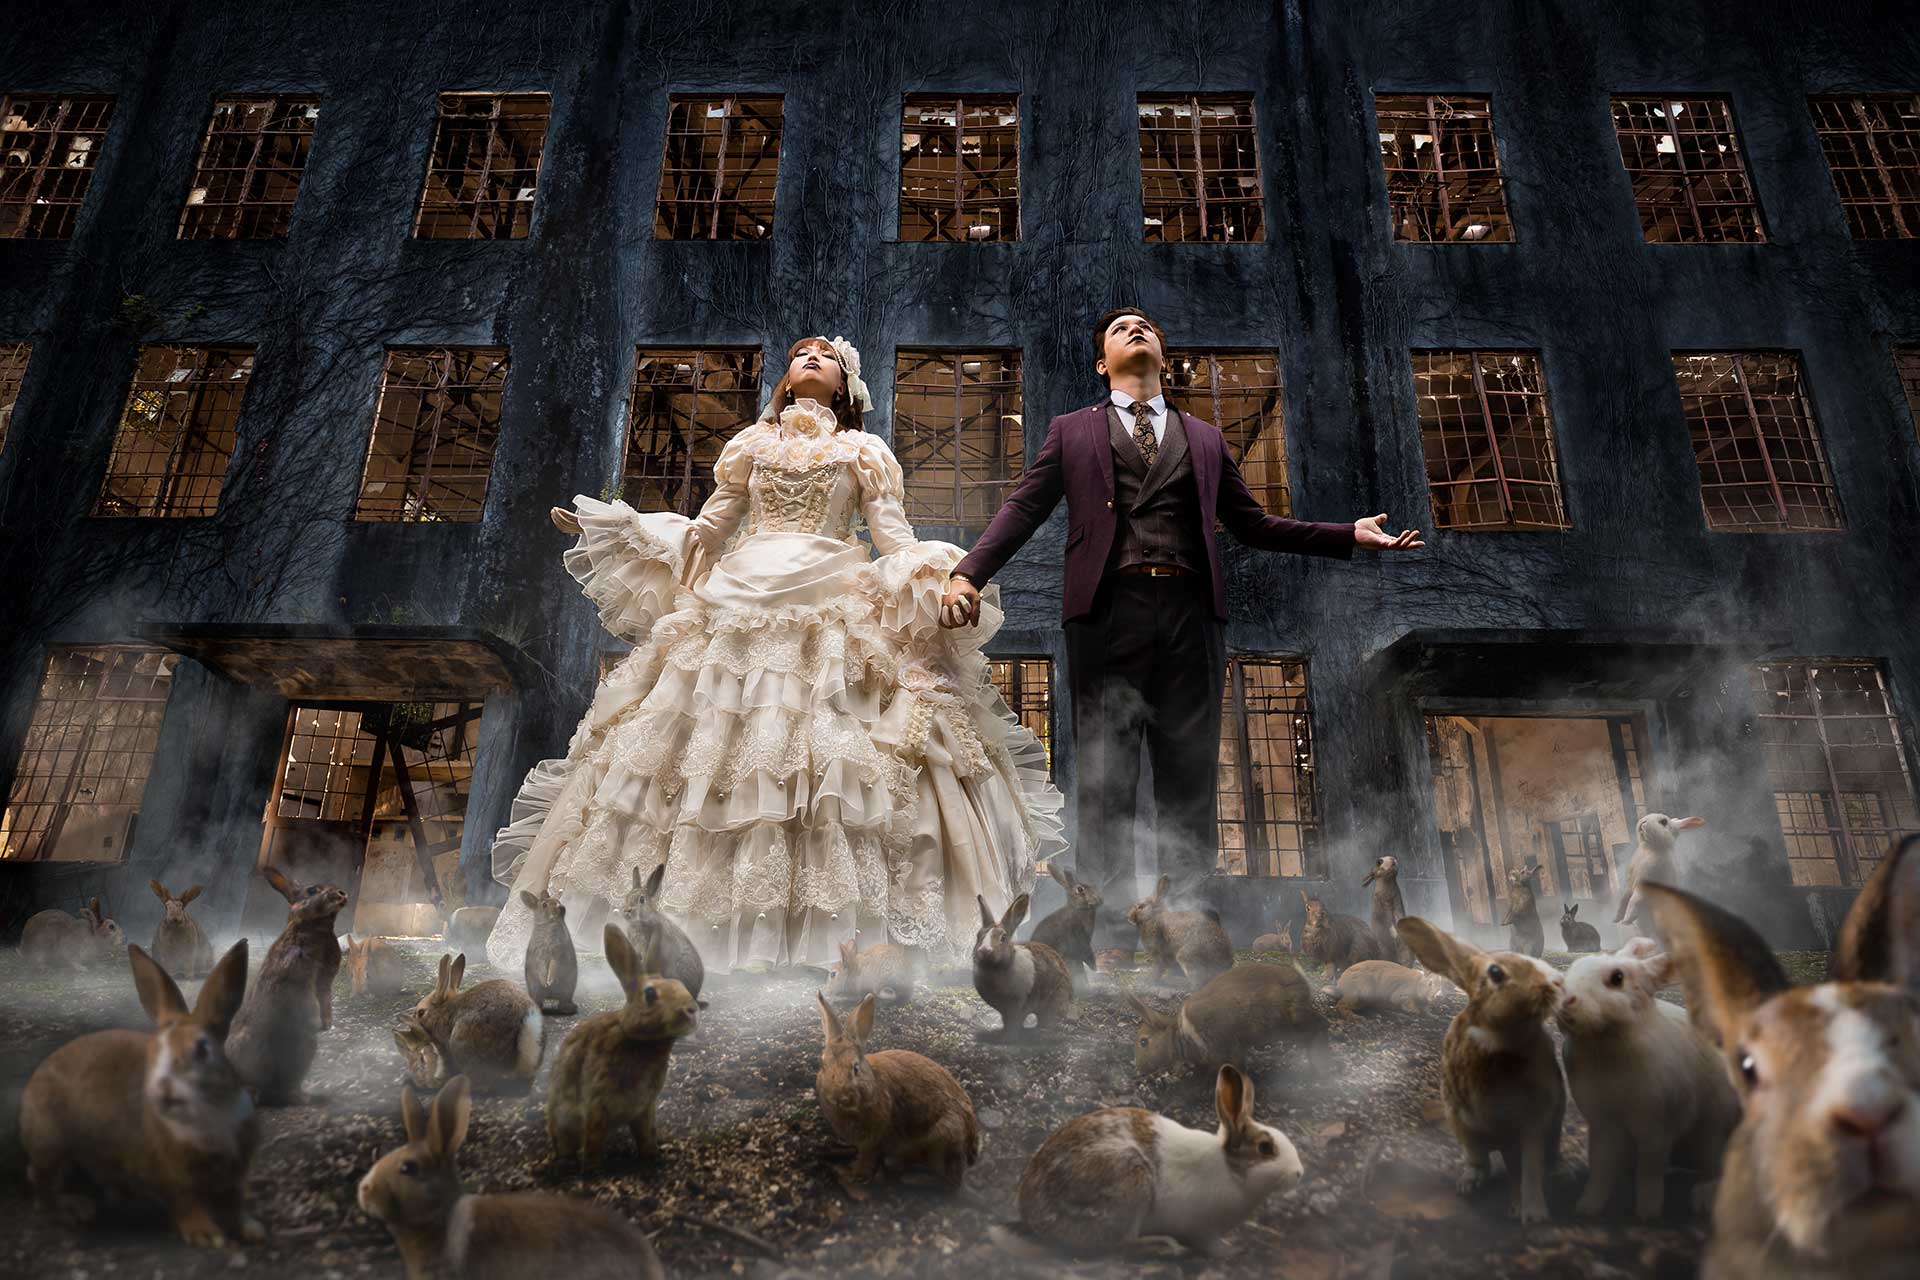 A Victorian couple posing with a group of rabbits in a creative wedding photoshoot.